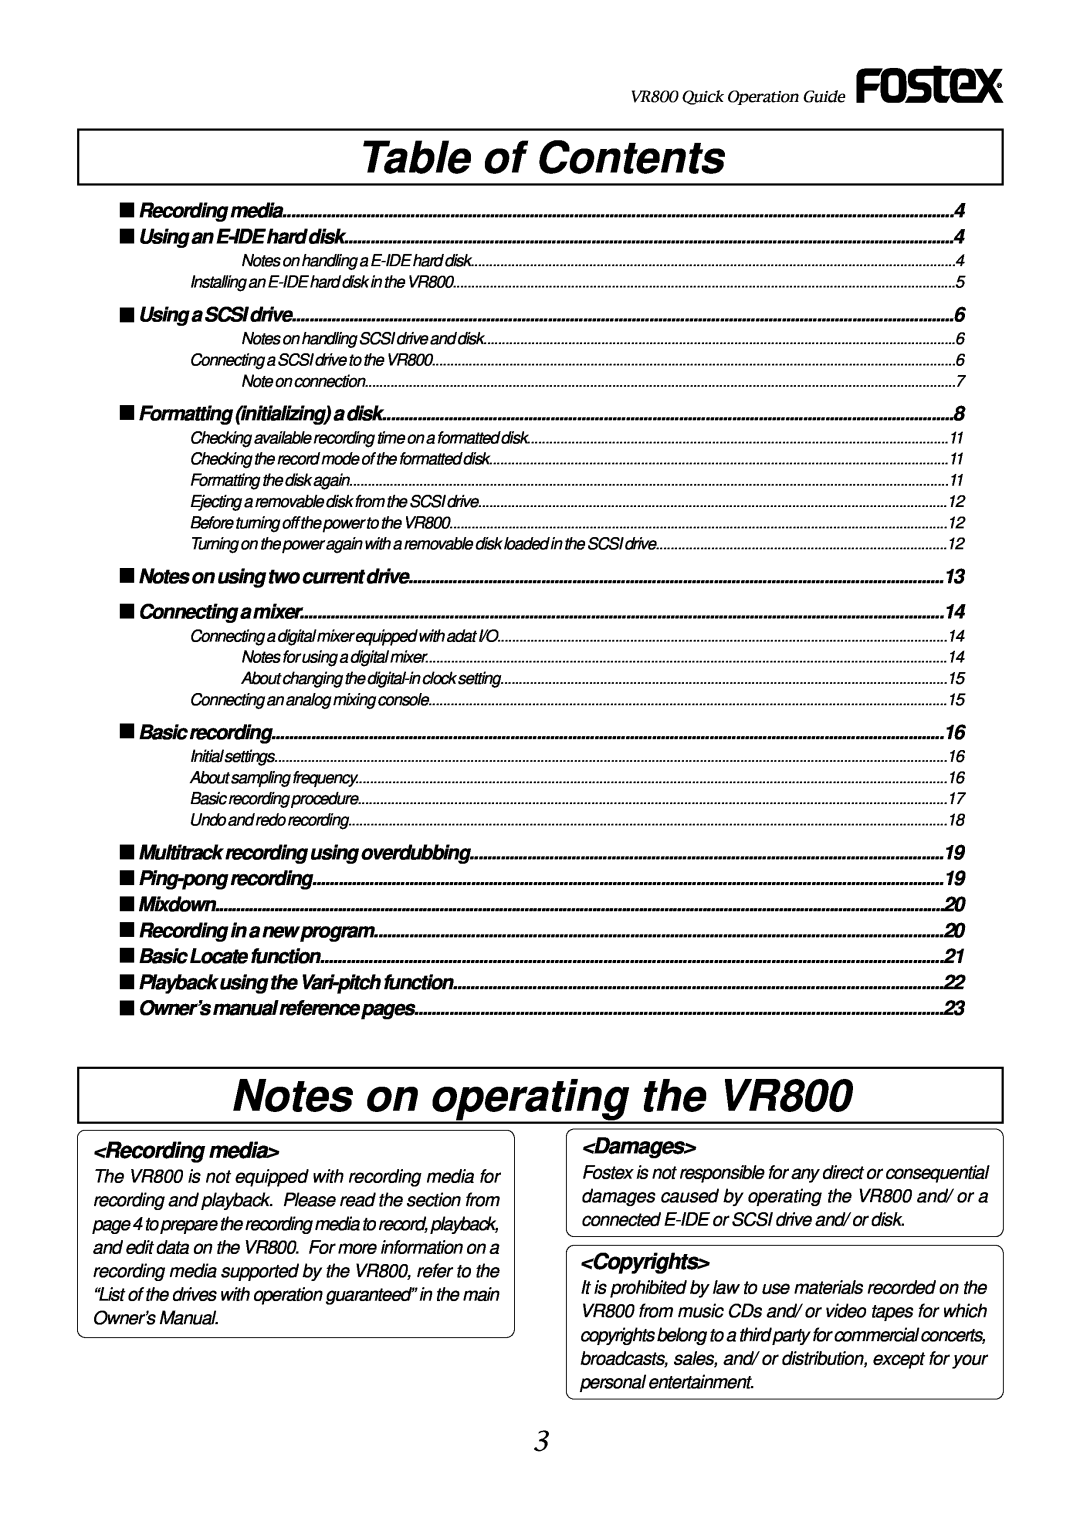 Fostex owner manual Table of Contents, Notes on operating the VR800, Recording media, Damages, Copyrights 